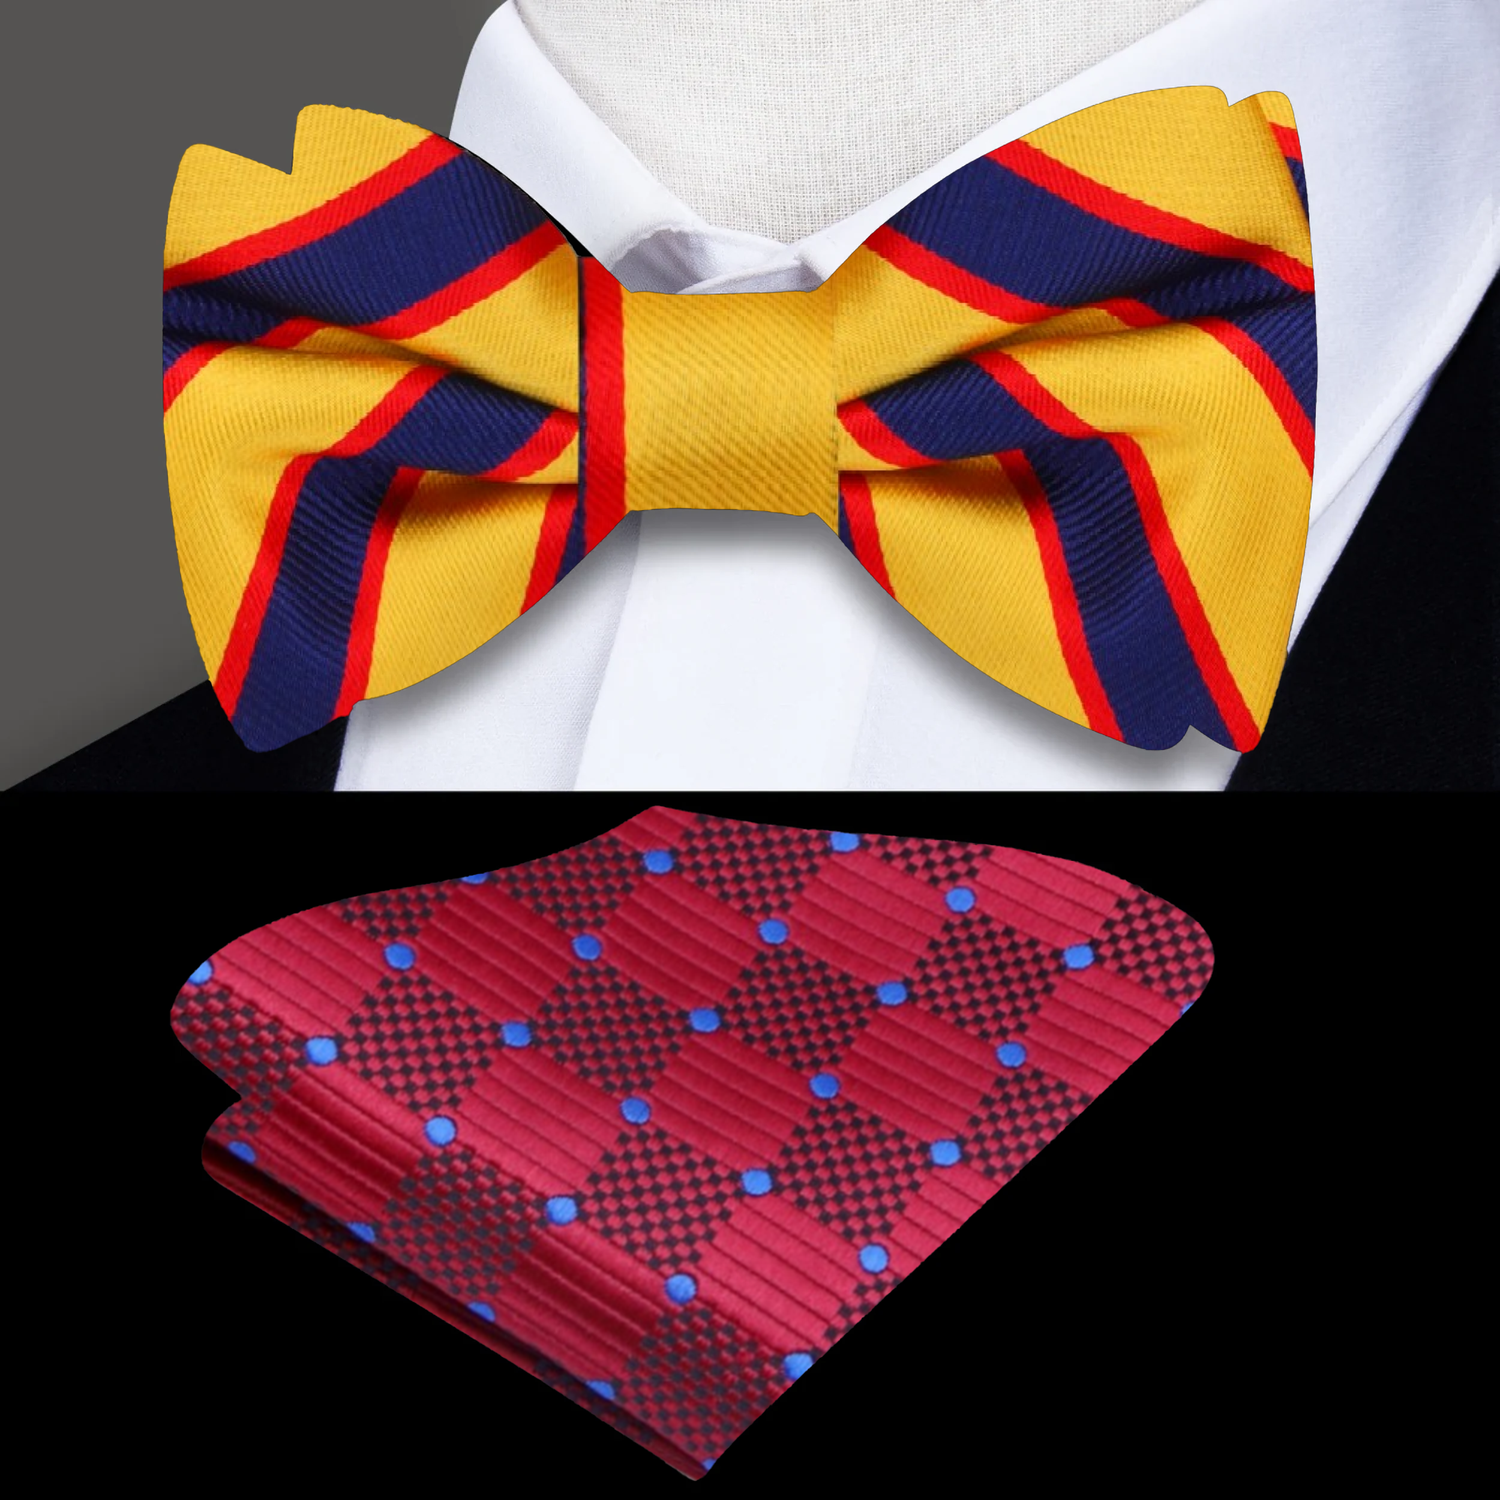 Yellow, Blue, Red Stripe Bow Tie and Accenting Red Pocket Square